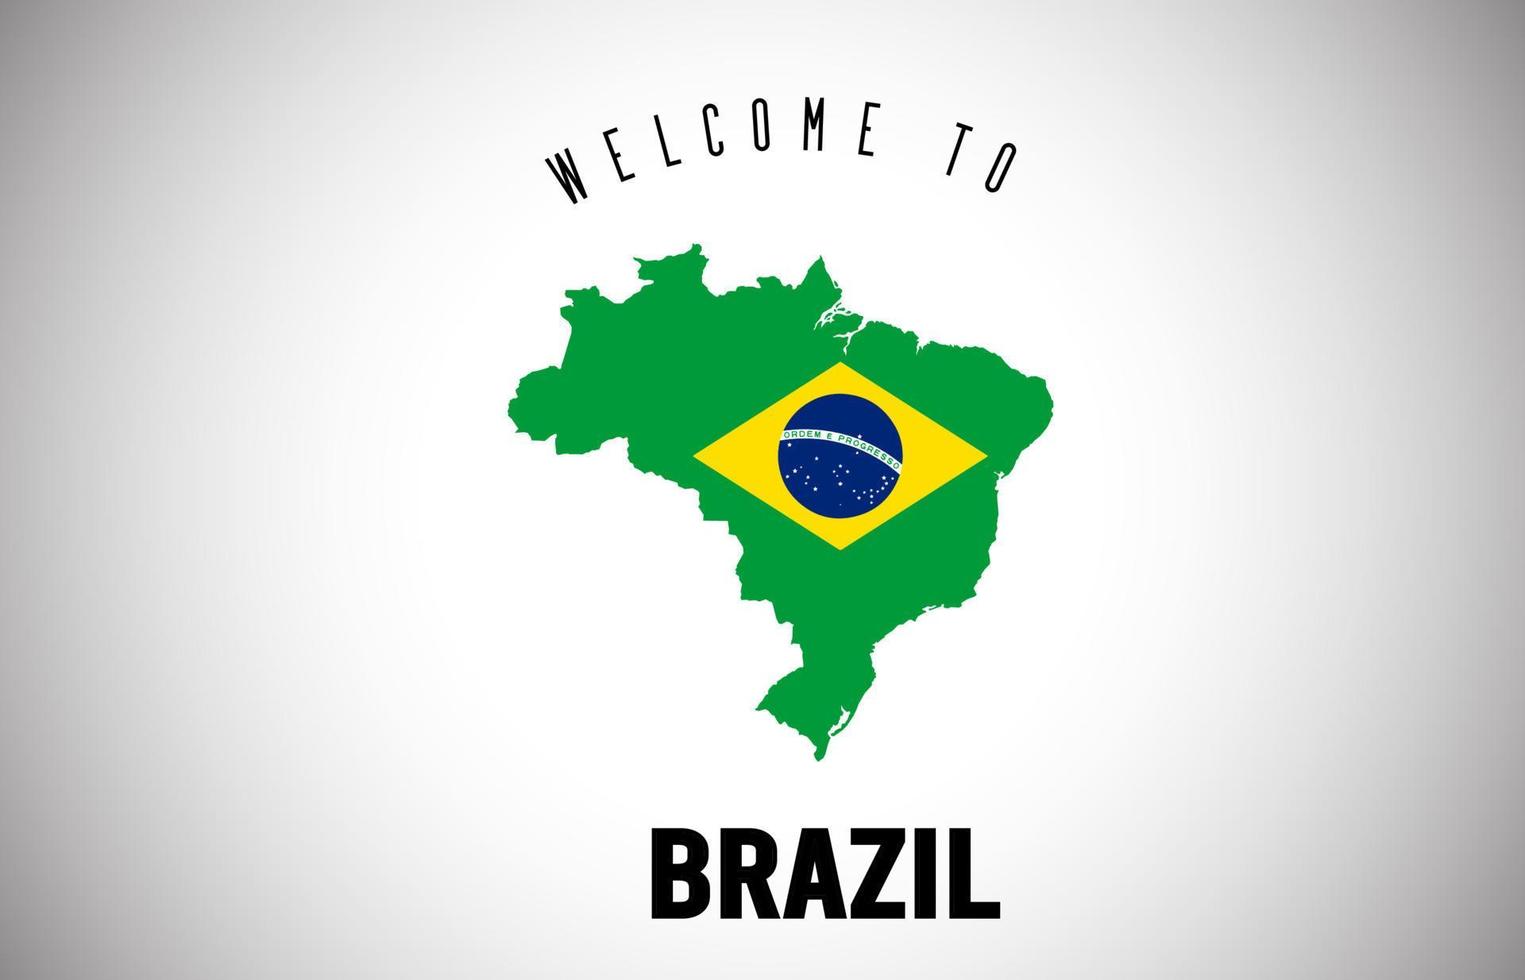 Brazil Welcome to Text and Country flag inside Country border Map Vector Design.